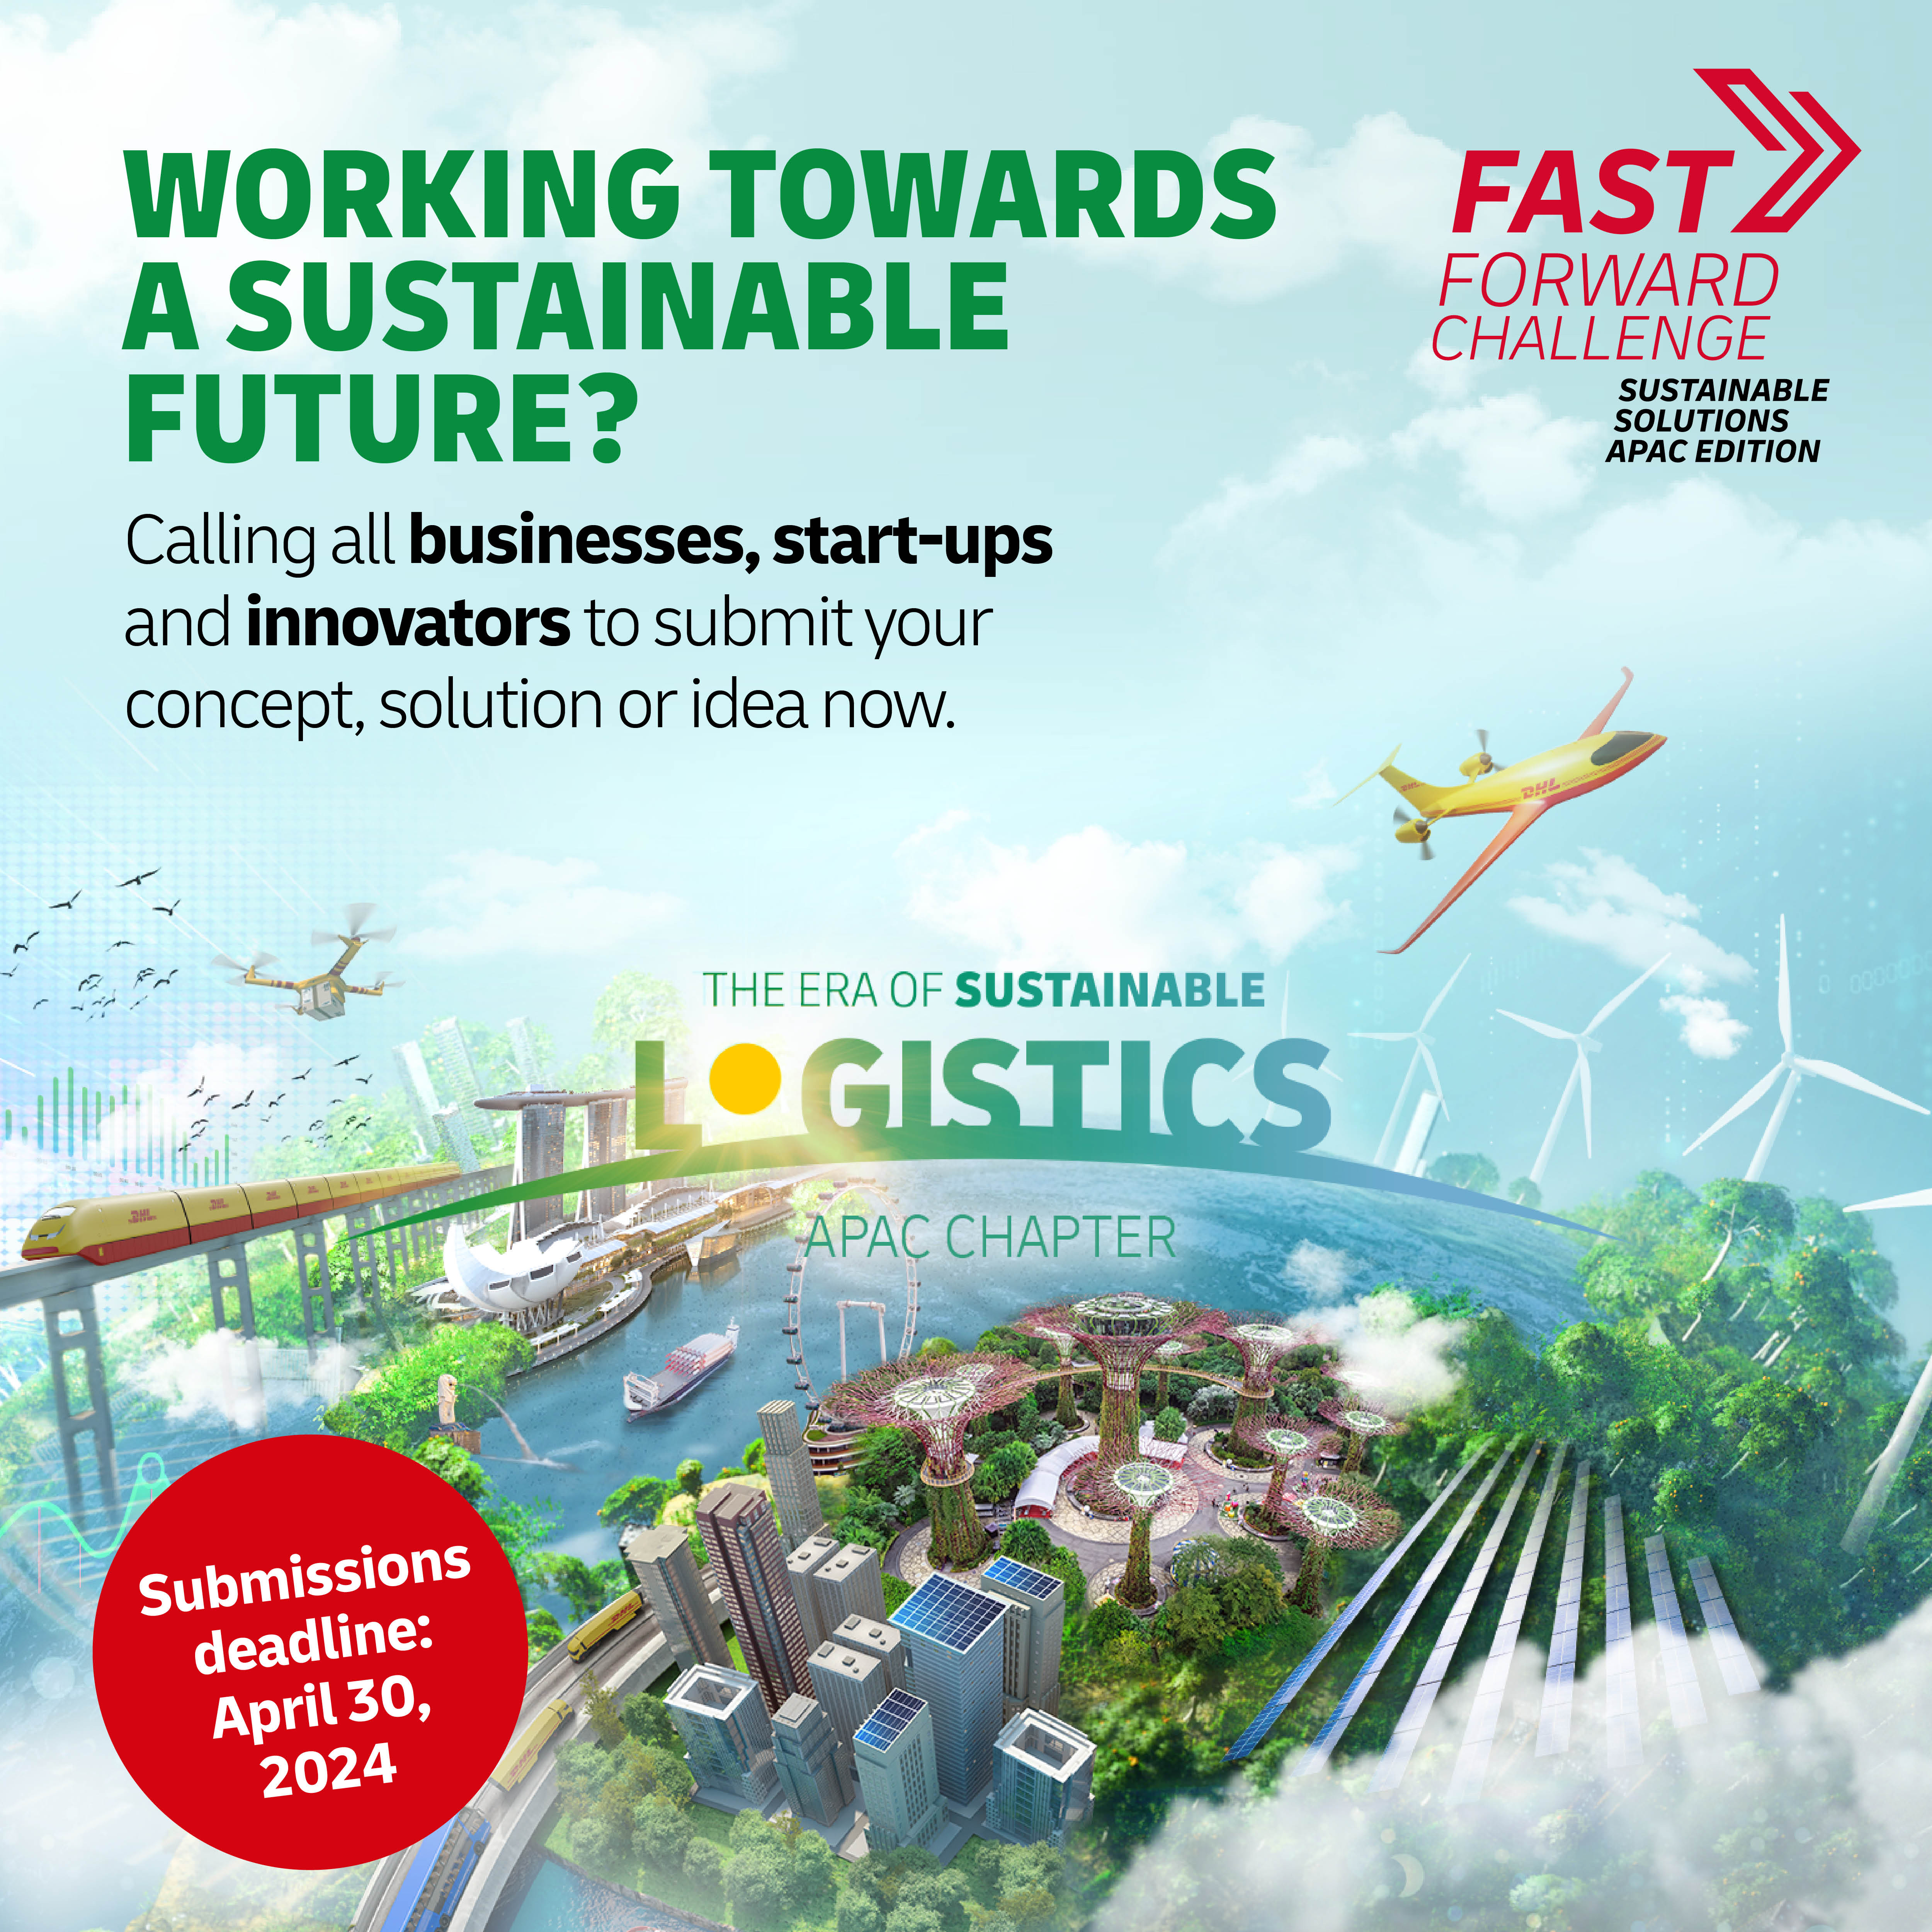 DHL invites sustainability innovators and startups to participate in Fast Forward Challenge